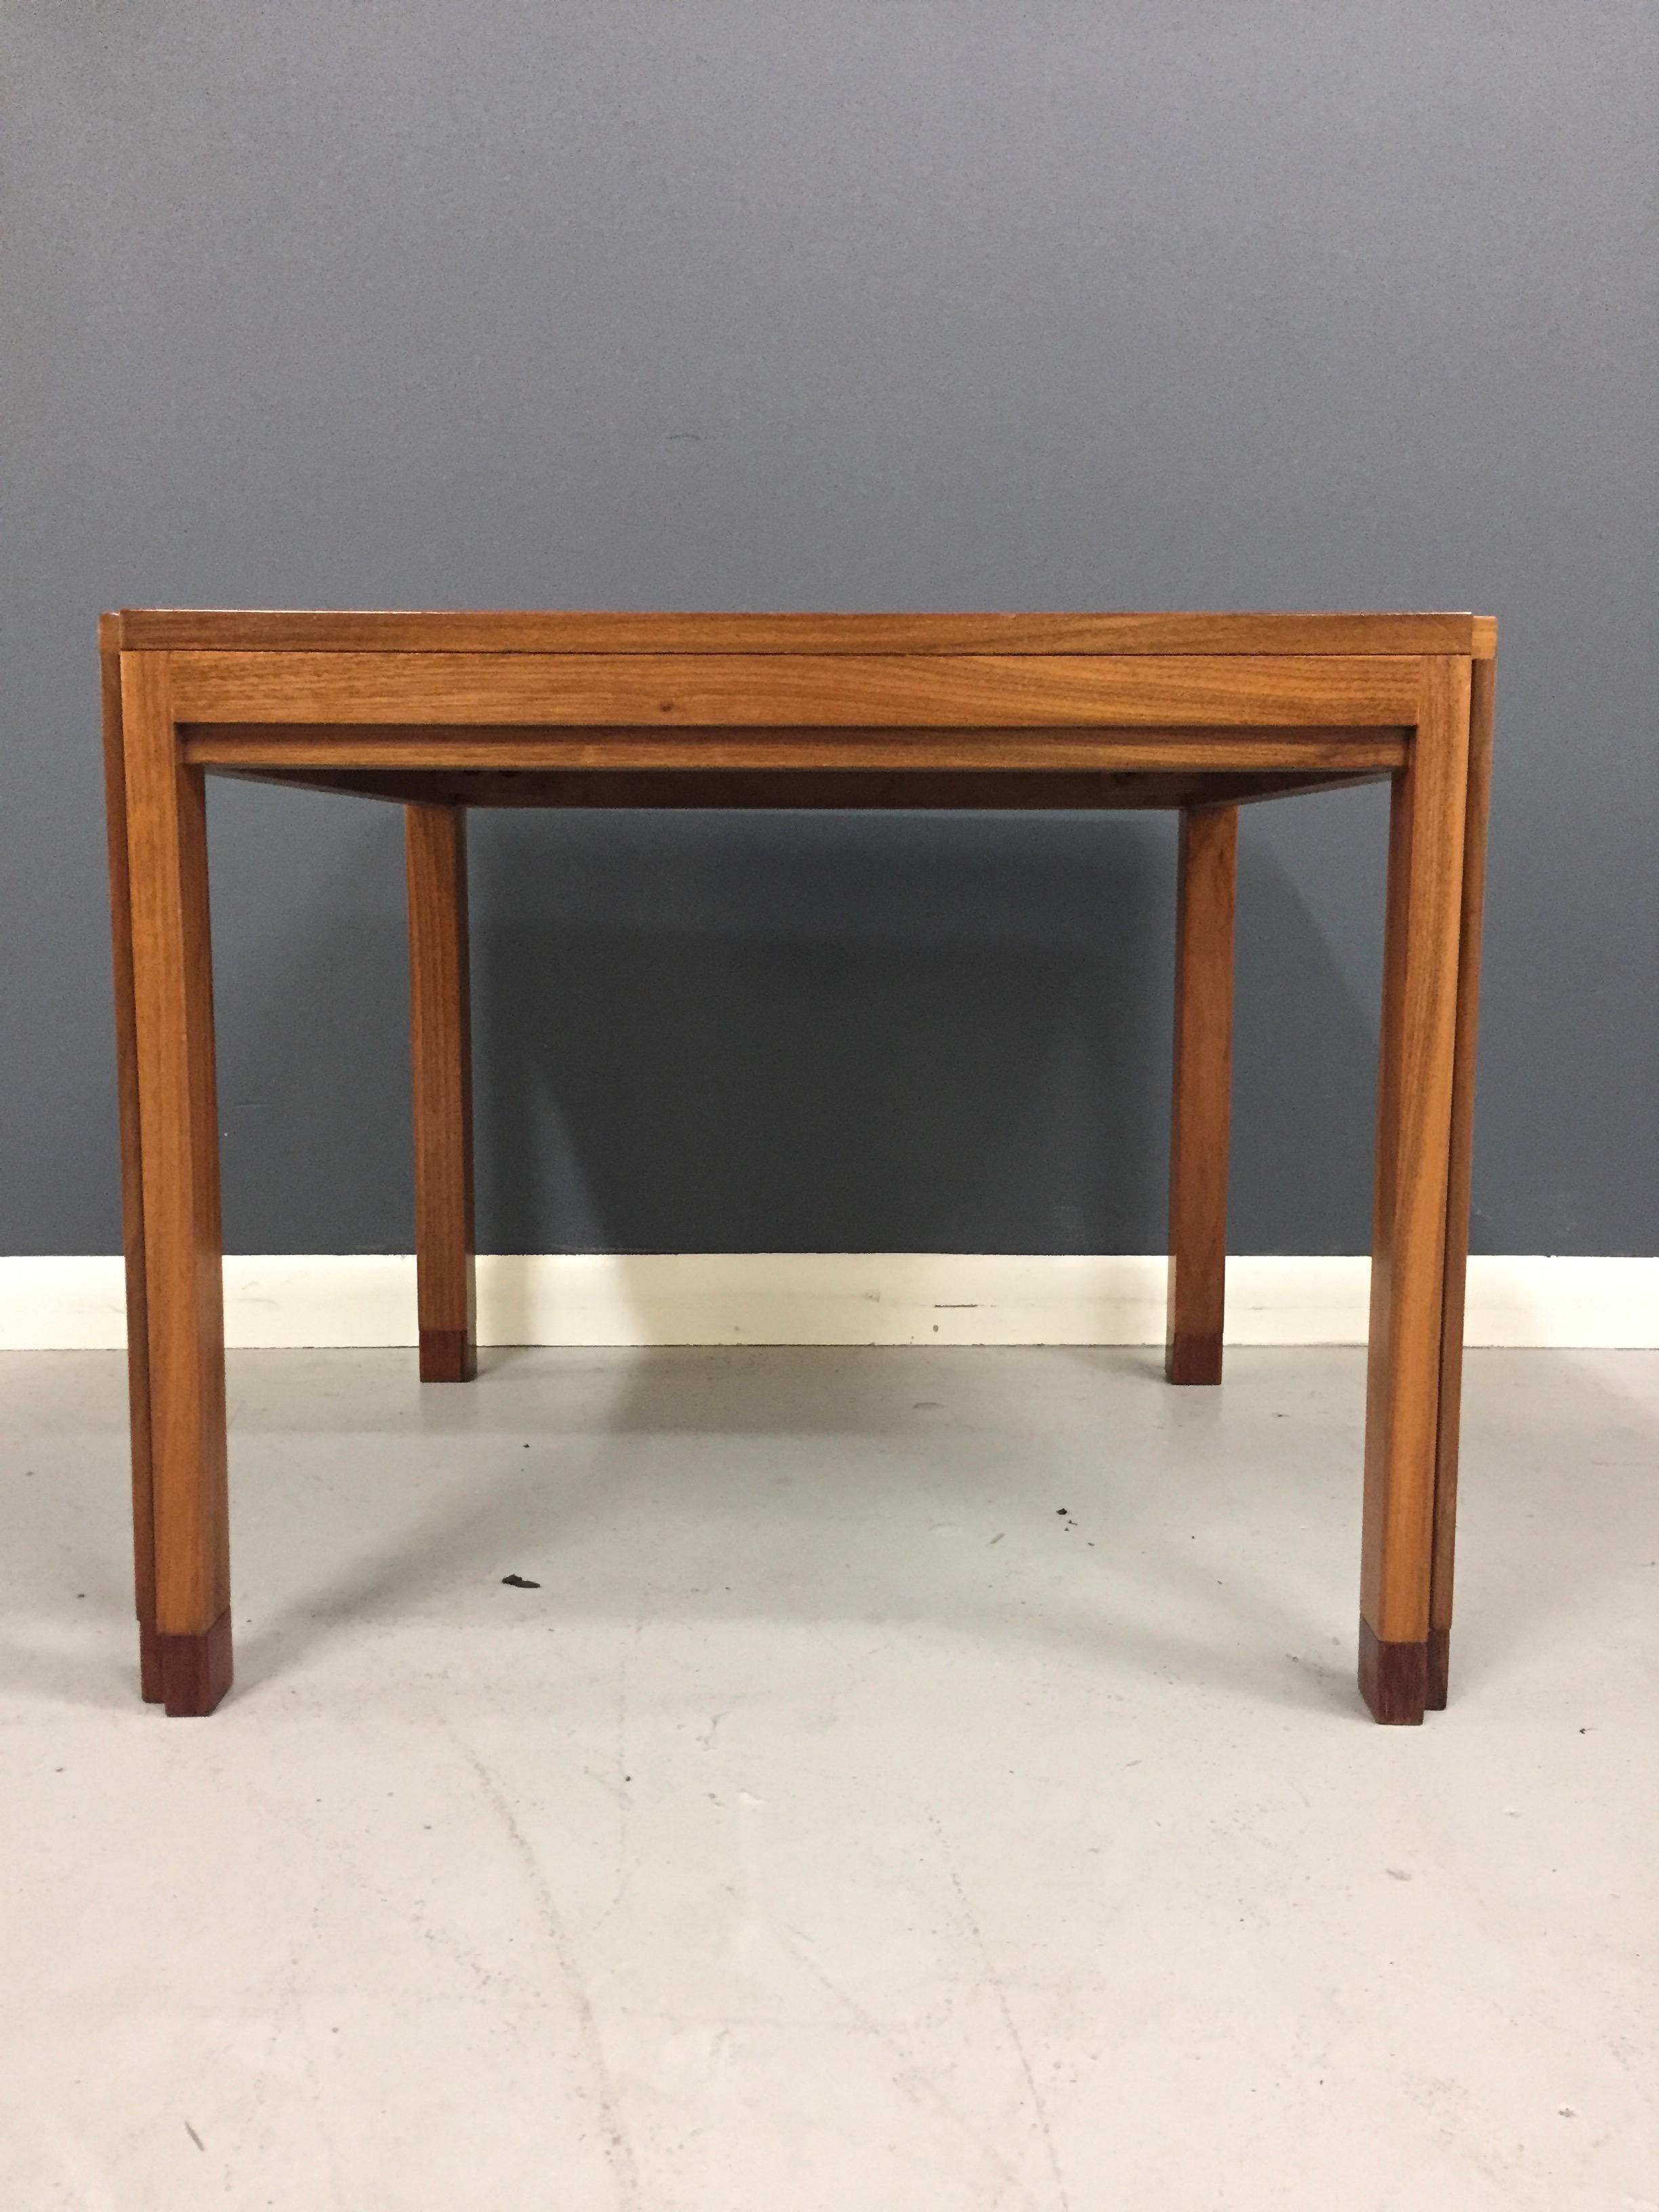 Edward Wormley walnut Parsons style side table with unusual aluminium inlaid legs. Incised corners start at the top and move all the way down the legs with aluminium inlay. Recessed apron and rosewood feet.